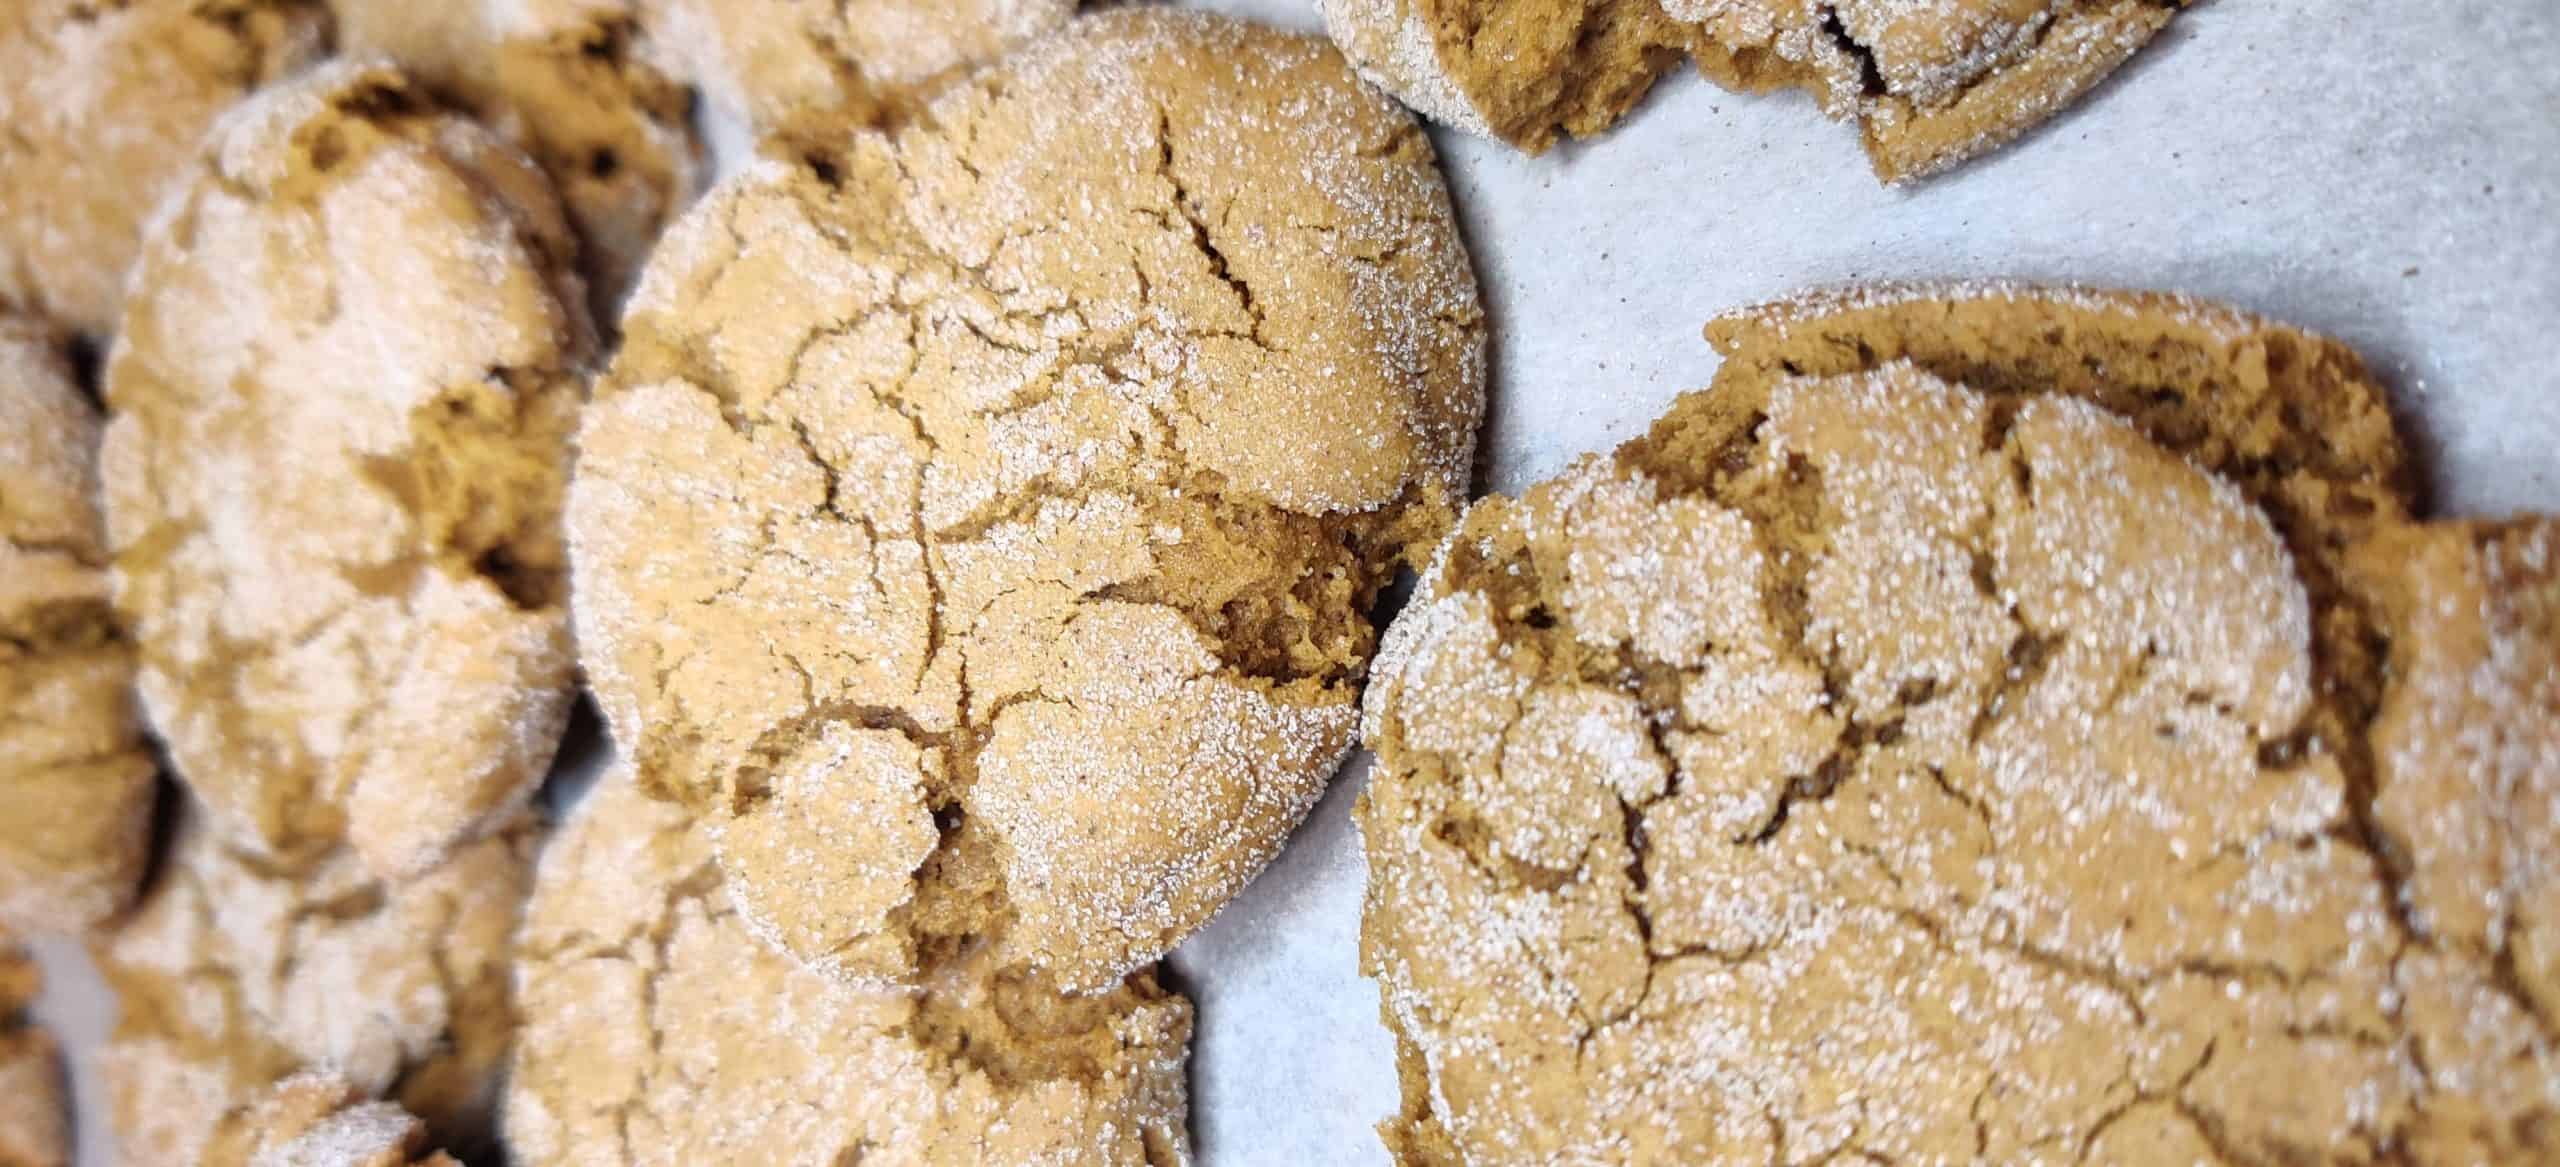 Recipe for How to Make Ginger Molasses Cookies